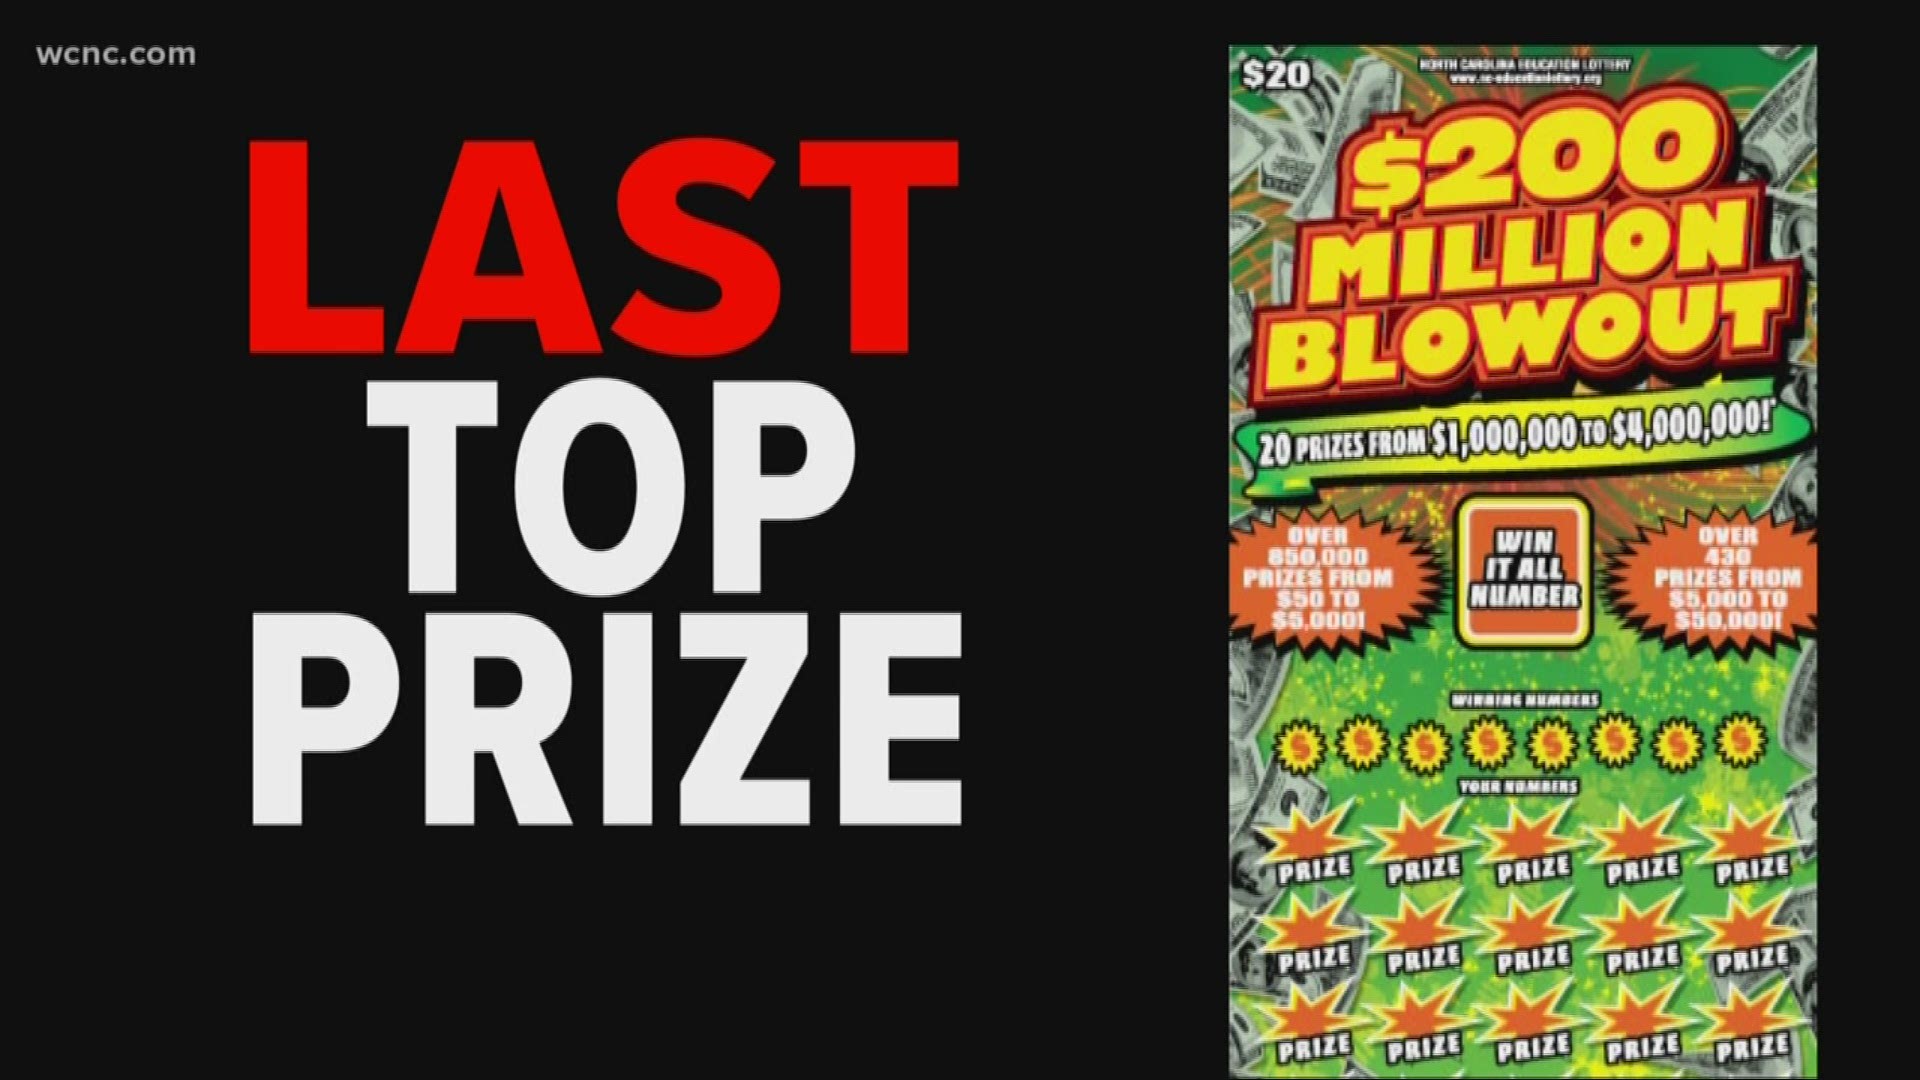 WCNC's Defenders set out to find why lottery tickets are still sold once the top prize is gone.